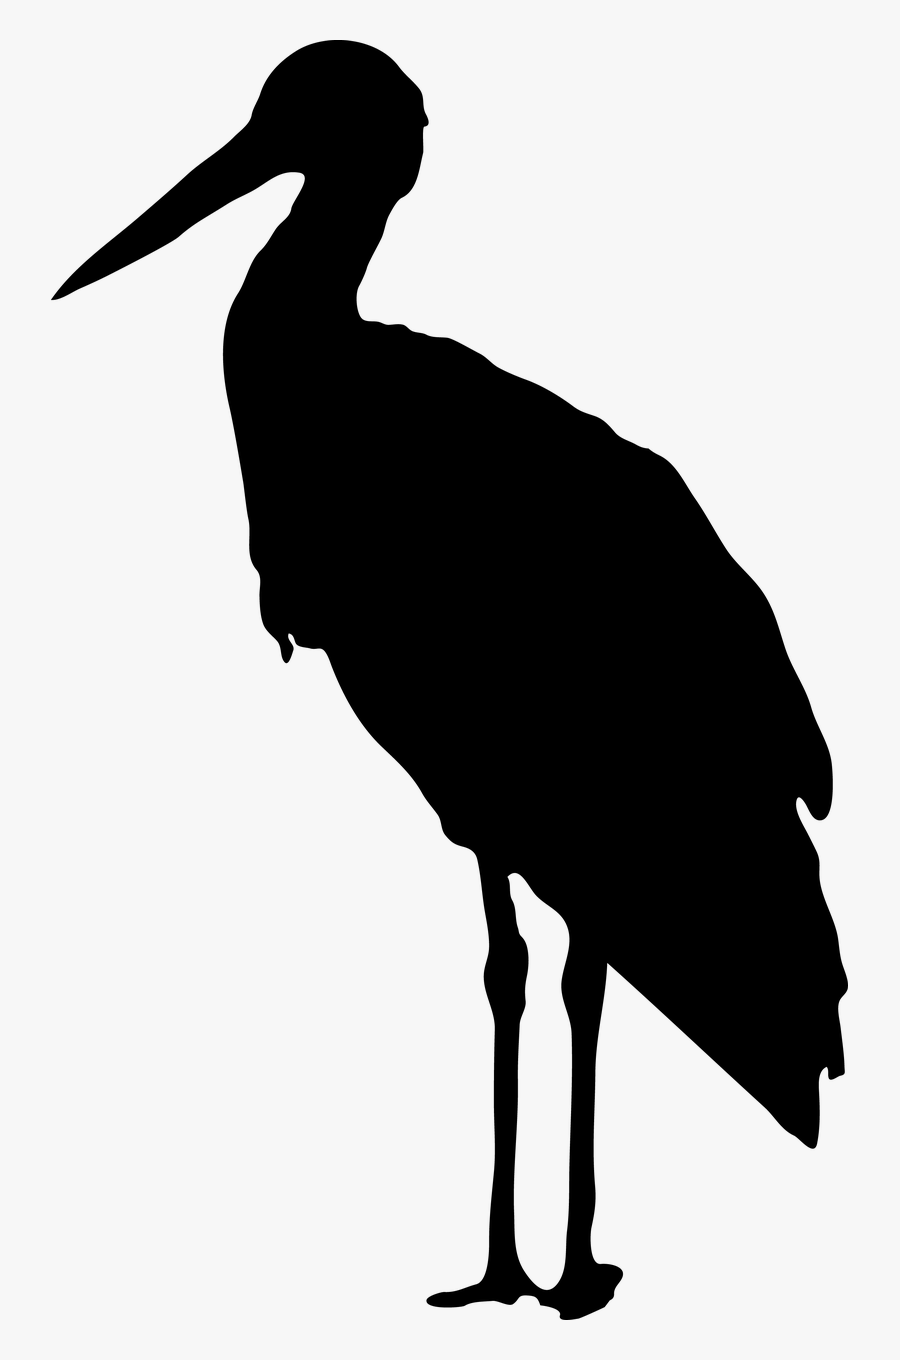 Transparent Feather Silhouette Png - Stork Black And White, Transparent Clipart